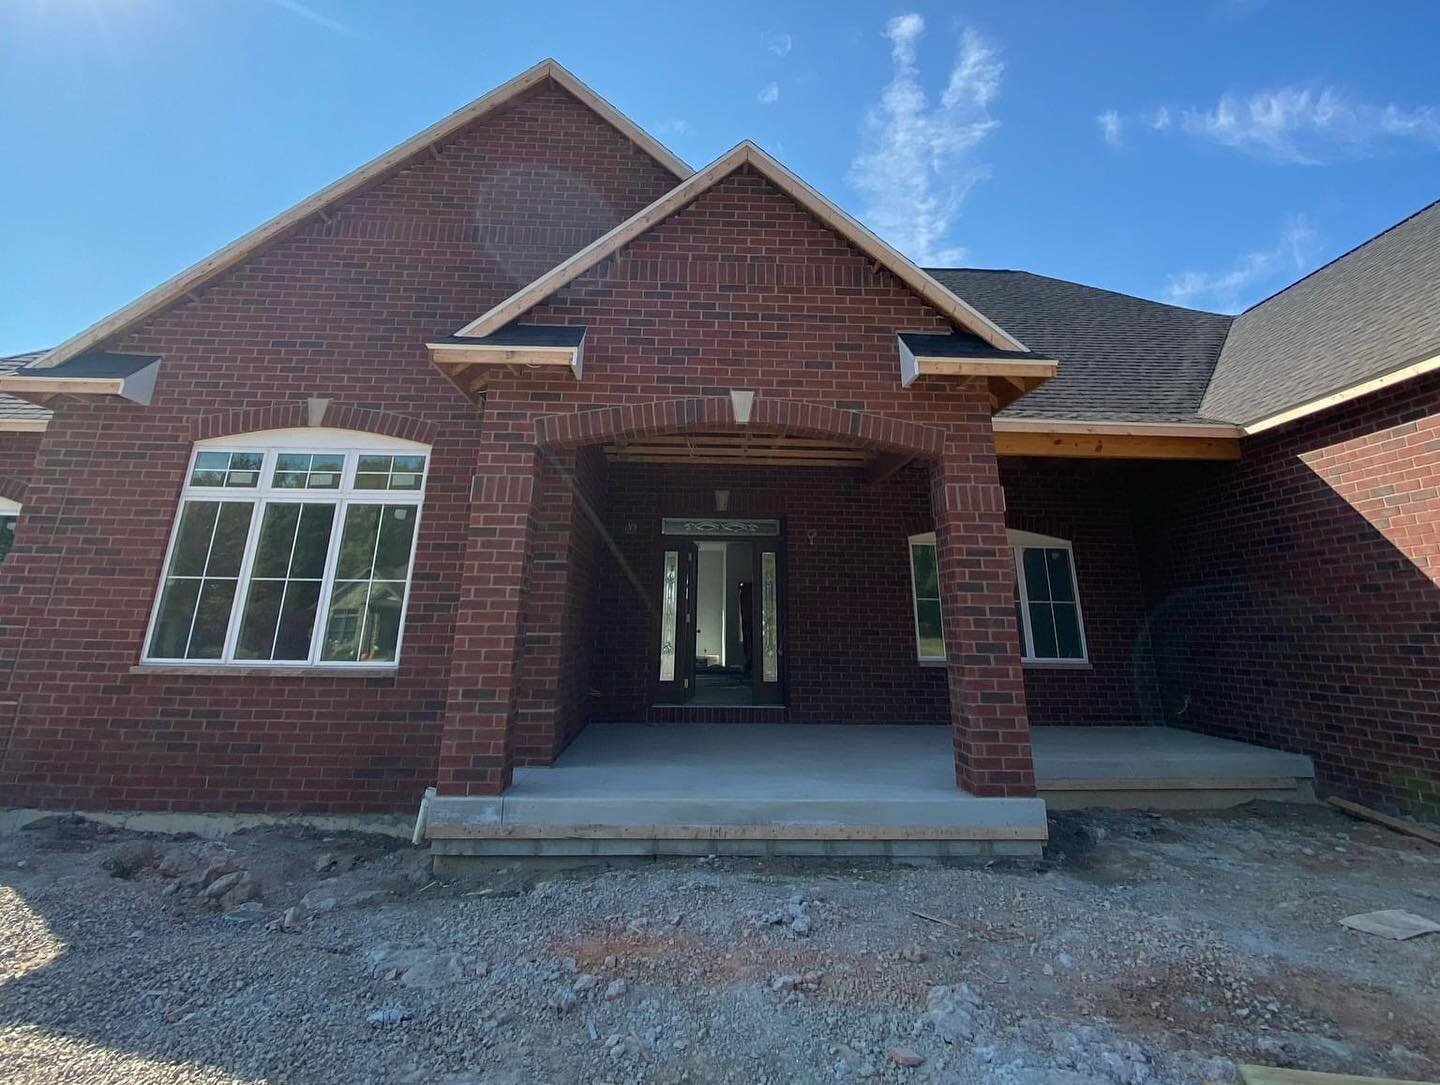 🏠This home is quickly coming together and is quite the beauty. With 5 bedrooms, 5.5 bathrooms, and 2 kitchens it will be a great entertainment space for friends and family.

⭐️ A few special features of note include:
&bull; Walkout finished basement